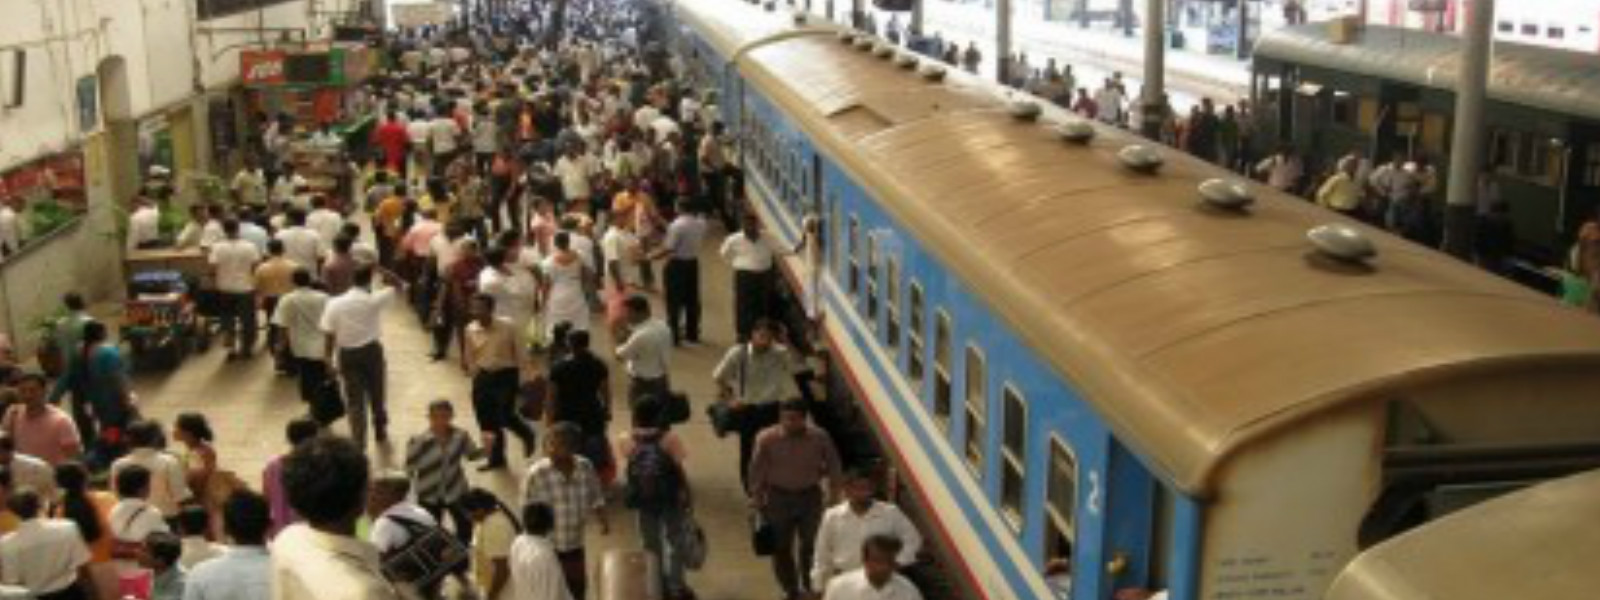 Disciplinary action against railway employees